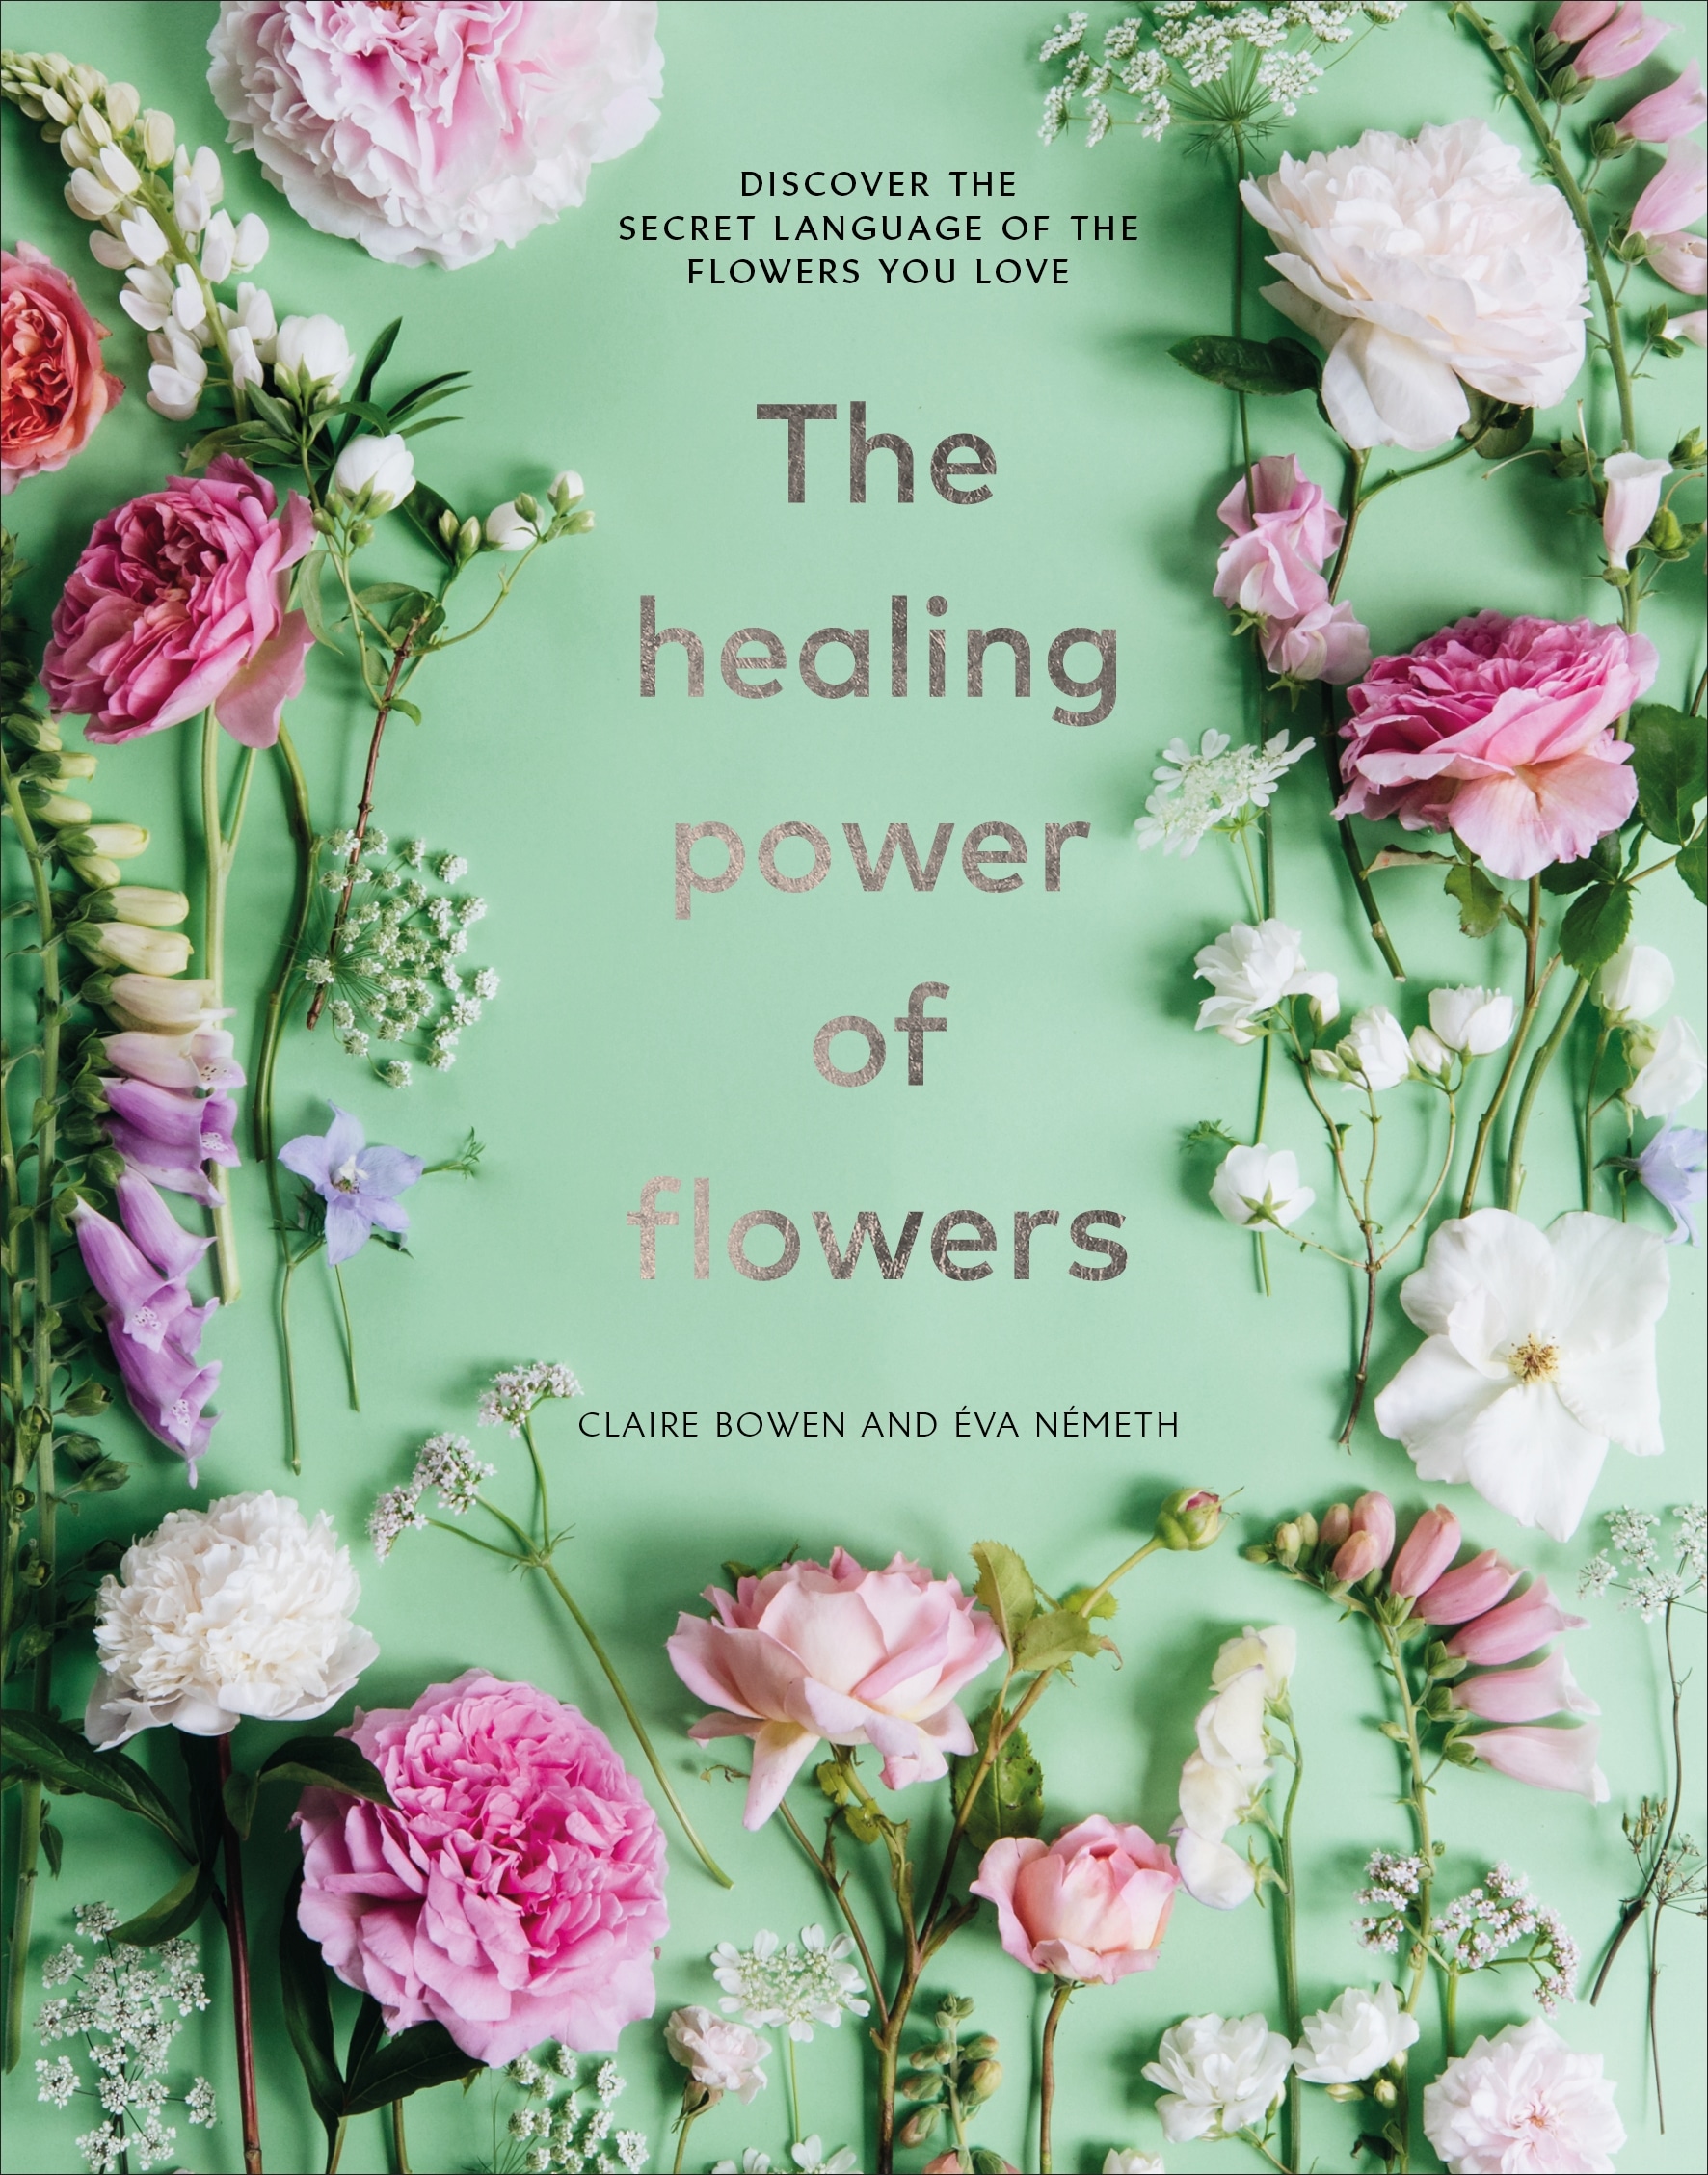 Book “The Healing Power of Flowers” by Claire Bowen — March 4, 2021